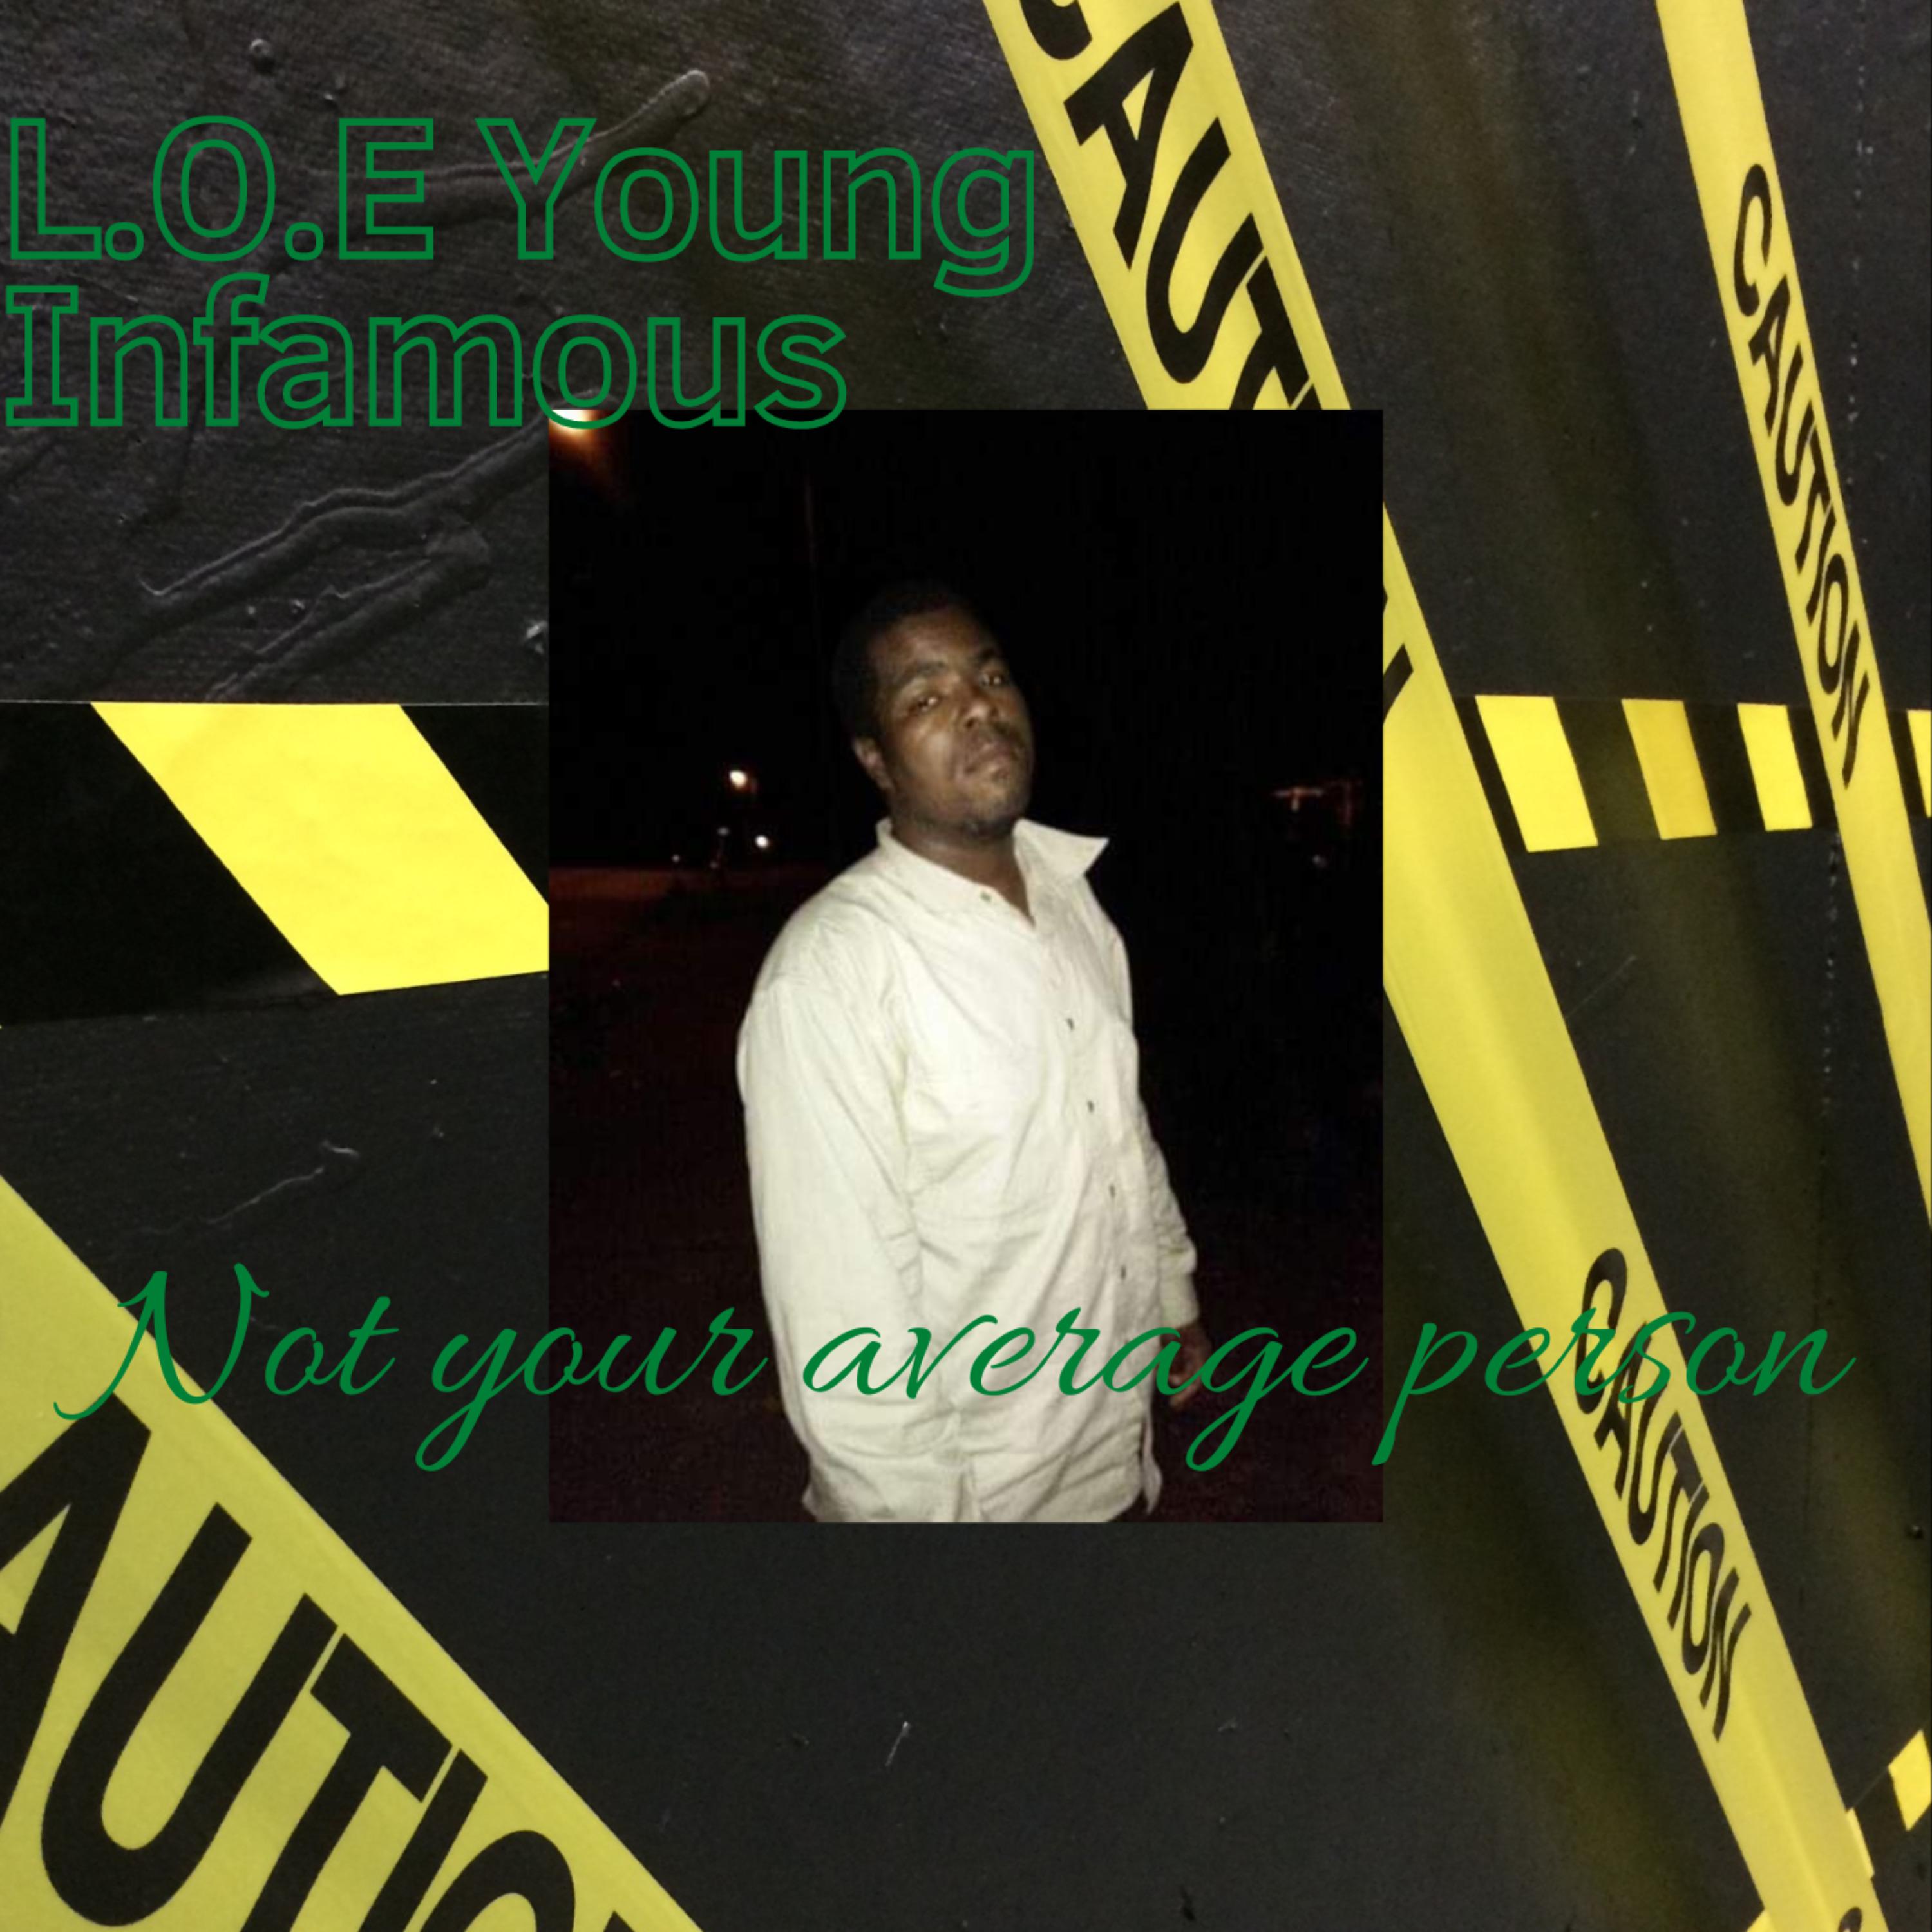 L.O.E Young Infamous - Gone